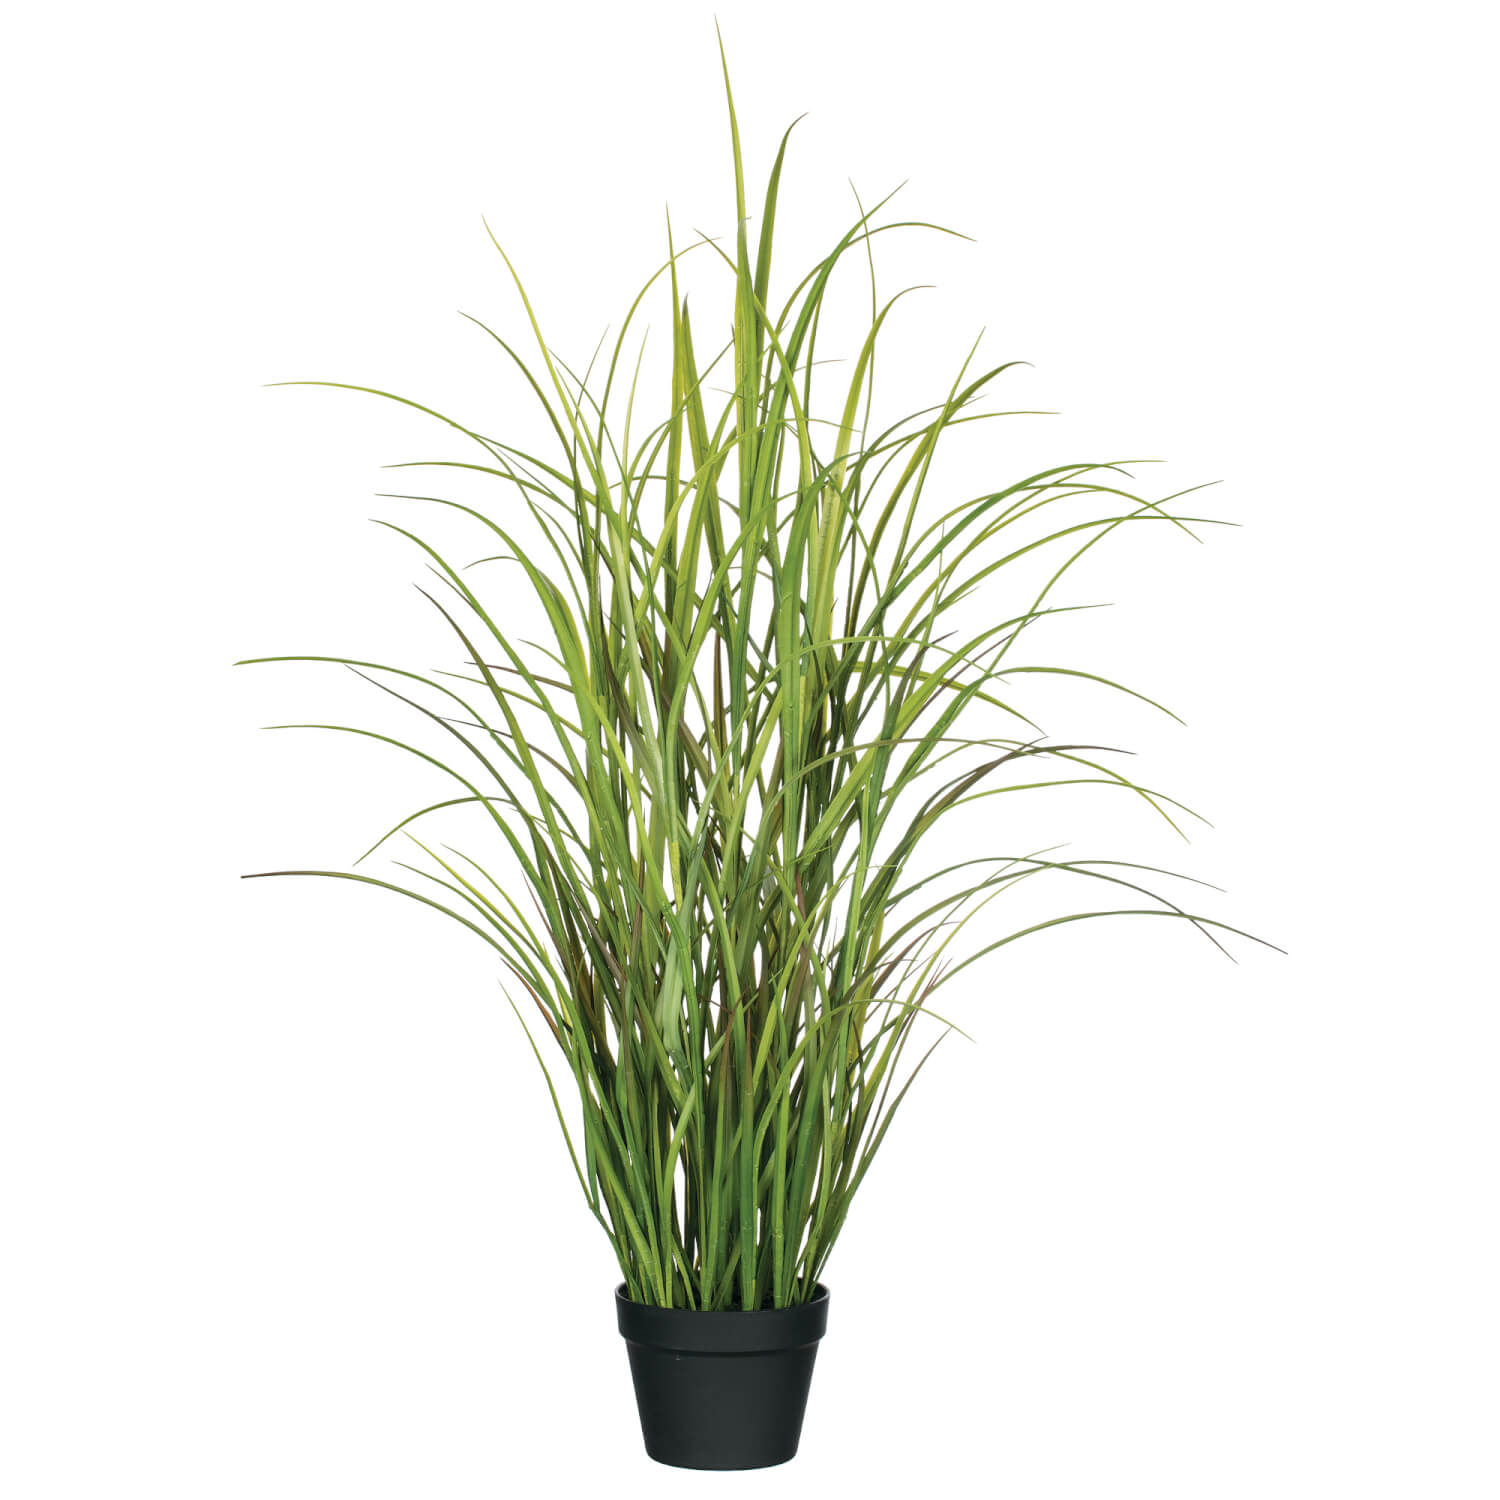 4' POTTED GRASS PLANT